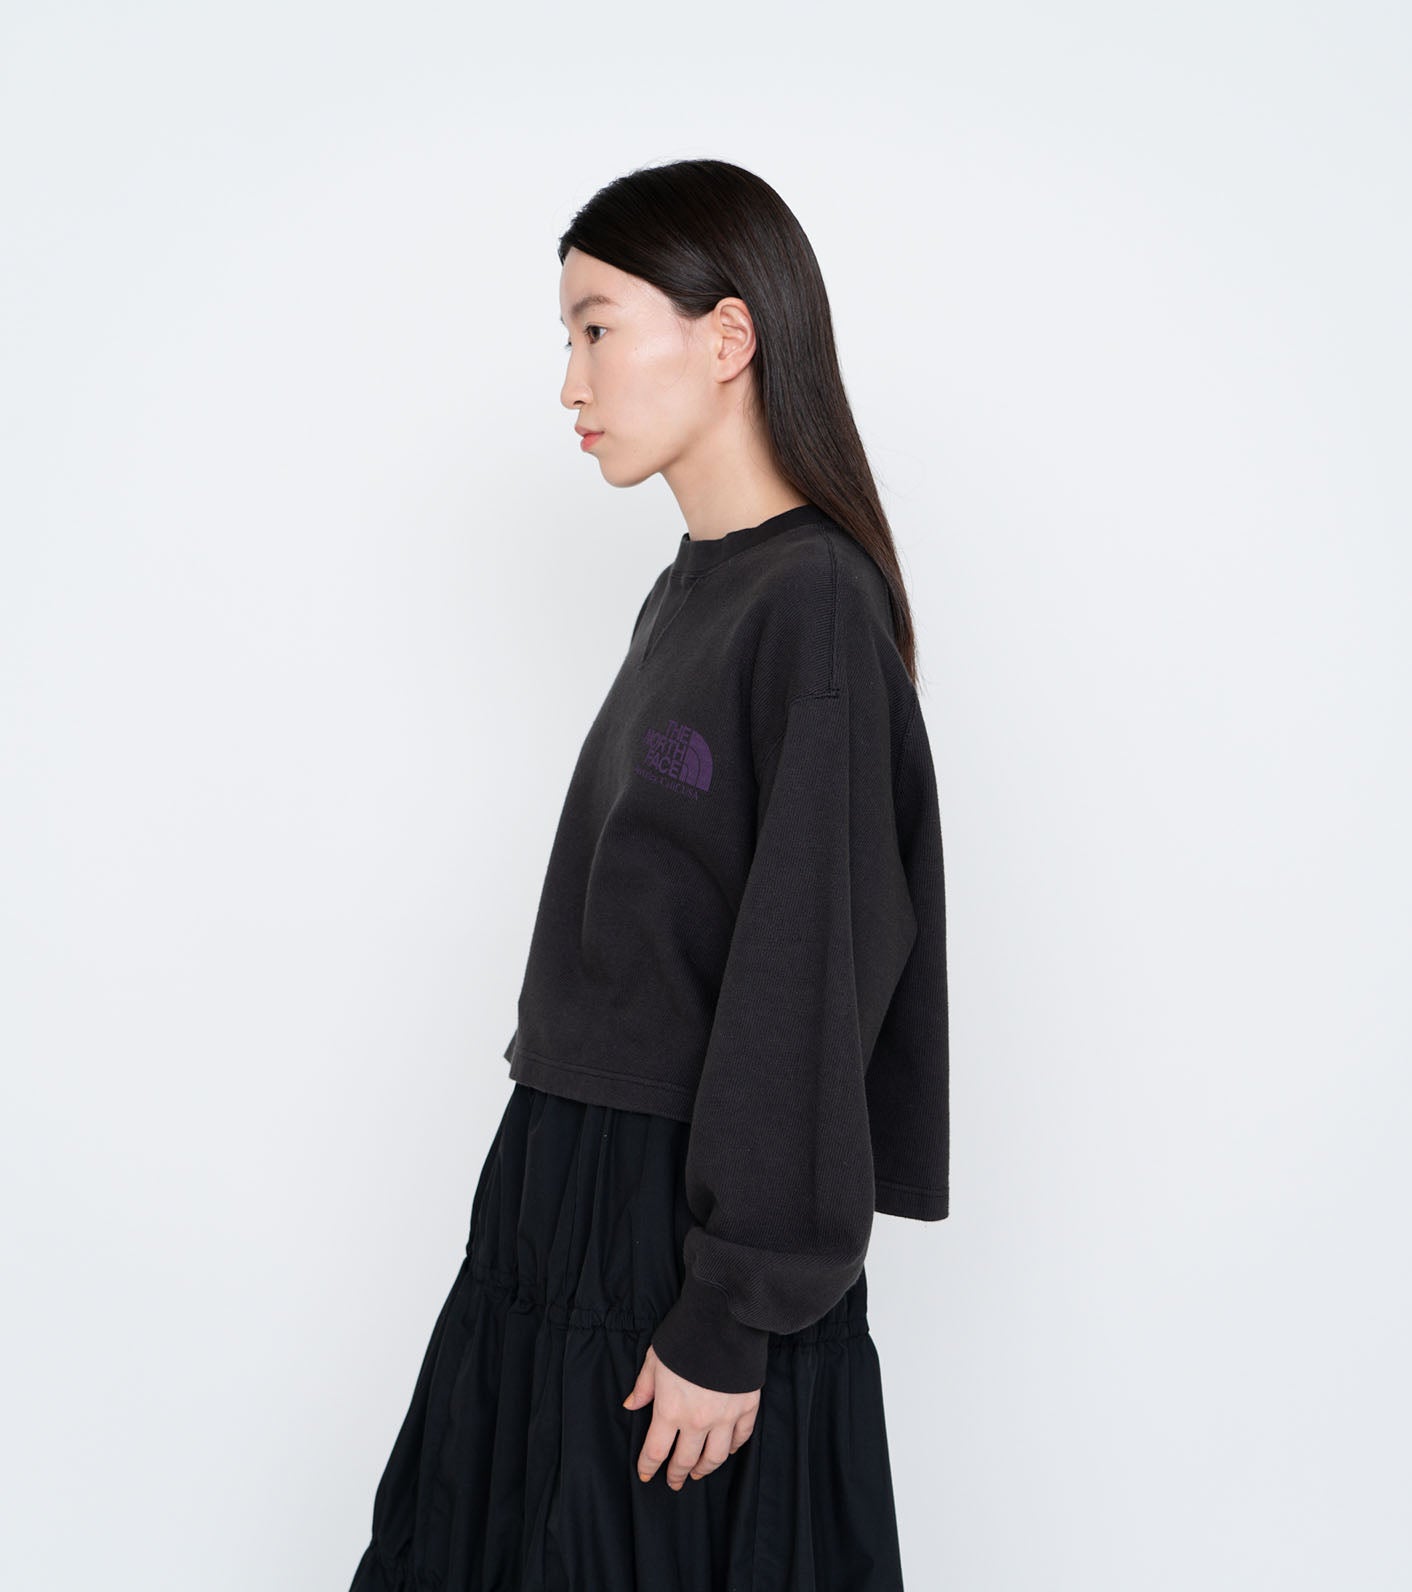 THE NORTH FACE PURPLE LABEL Field Cropped Graphic Tee